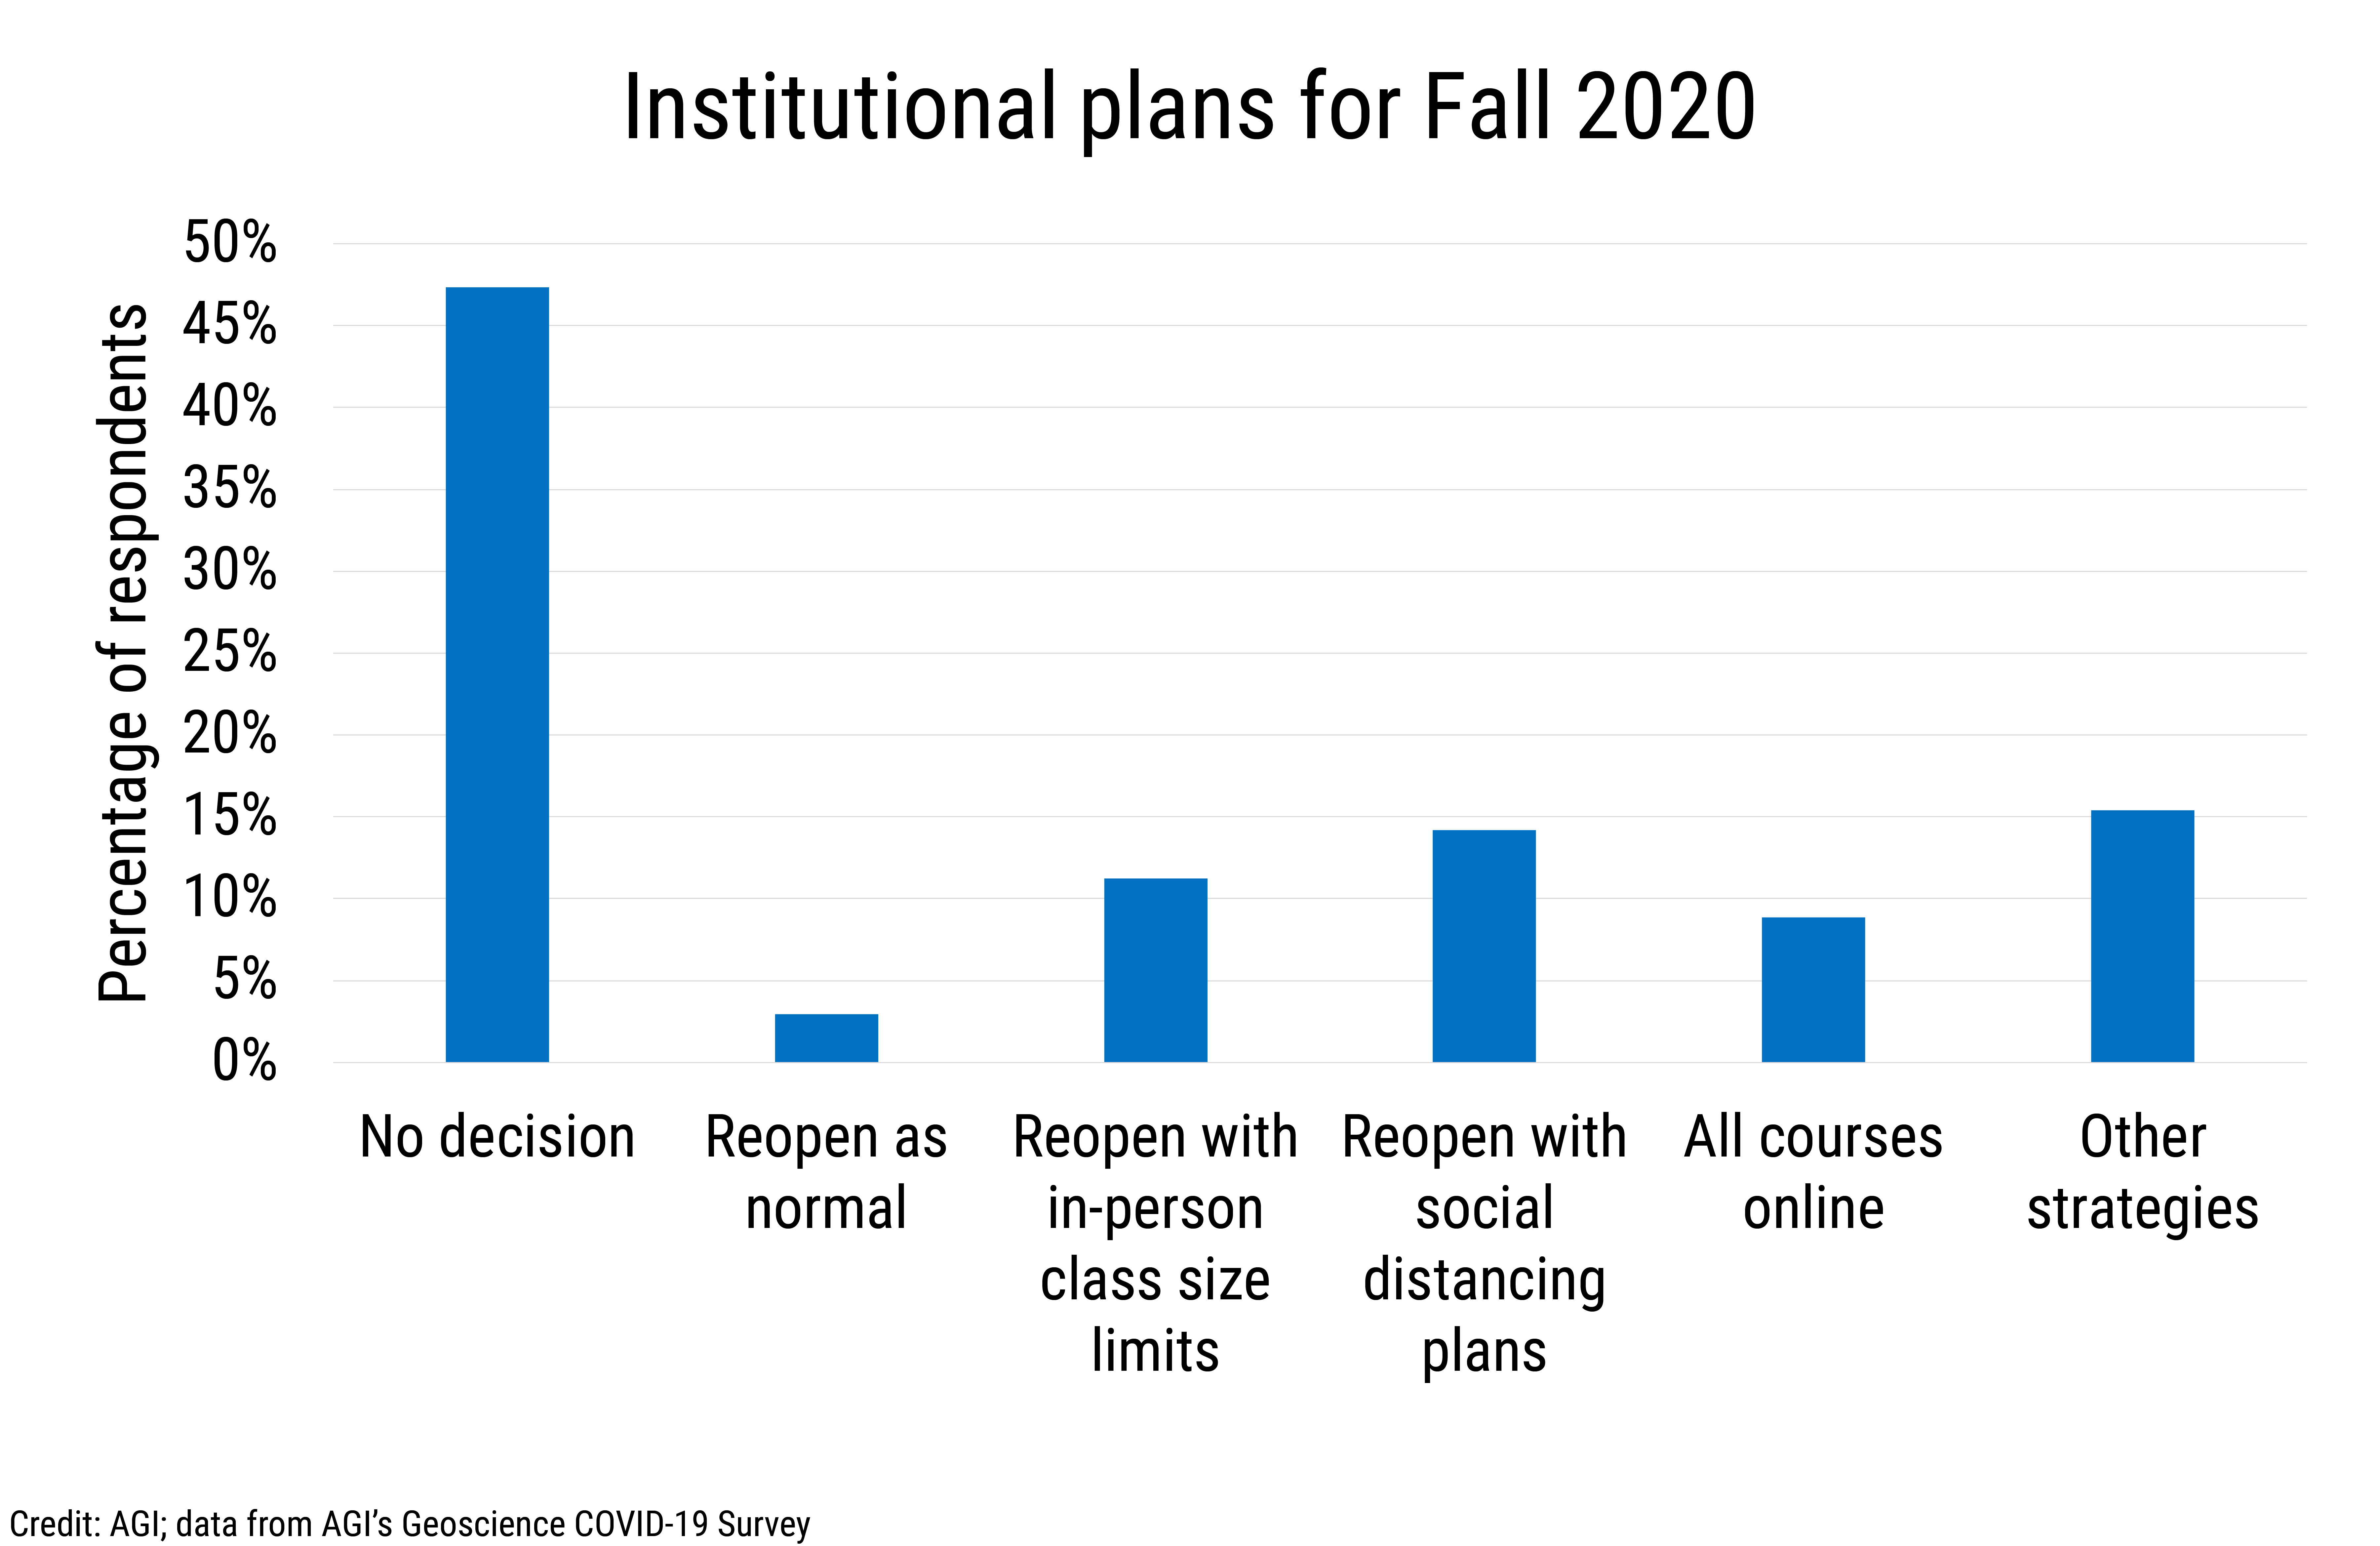 Data Brief 2020-007 chart 03: Institutional plans for Fall 2020 (credit: AGI)